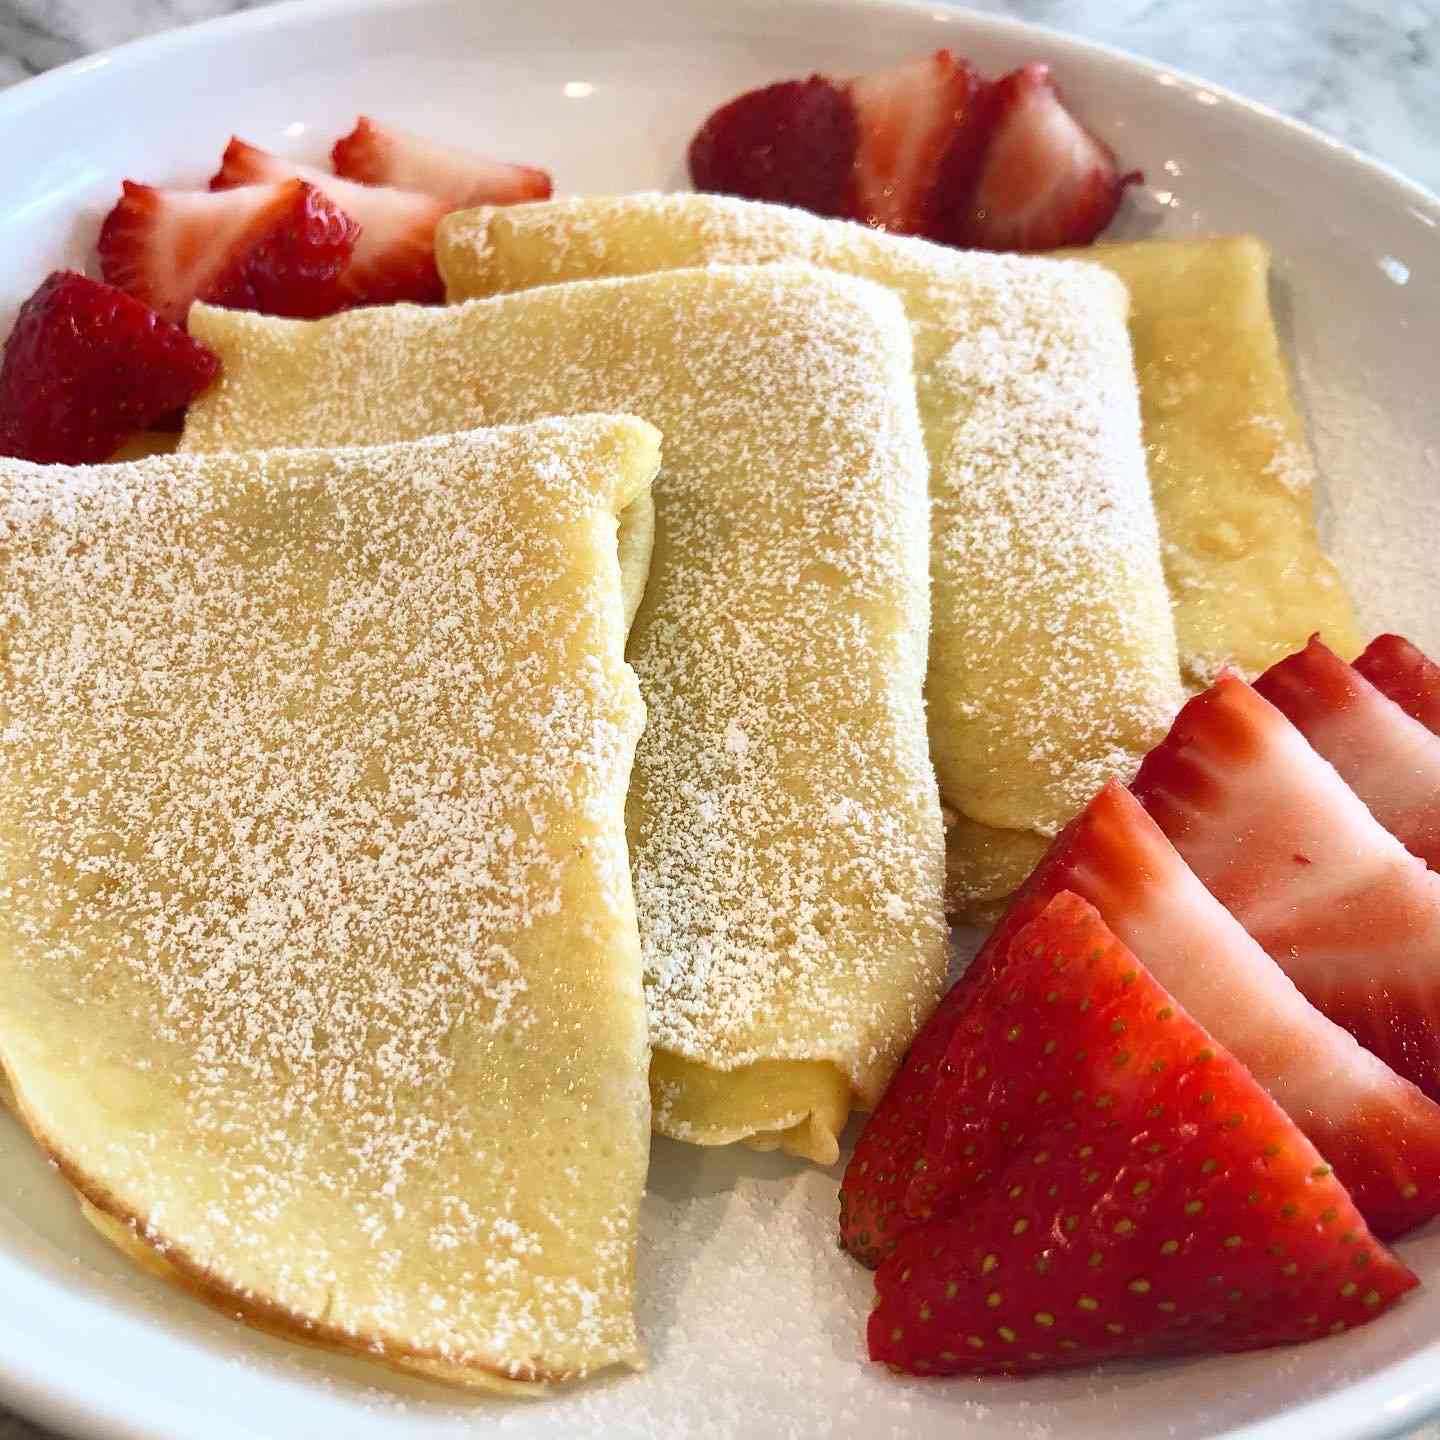 a plate of four crepes folded into quarters, dusted with powdered sugar with sliced strawberries on the side